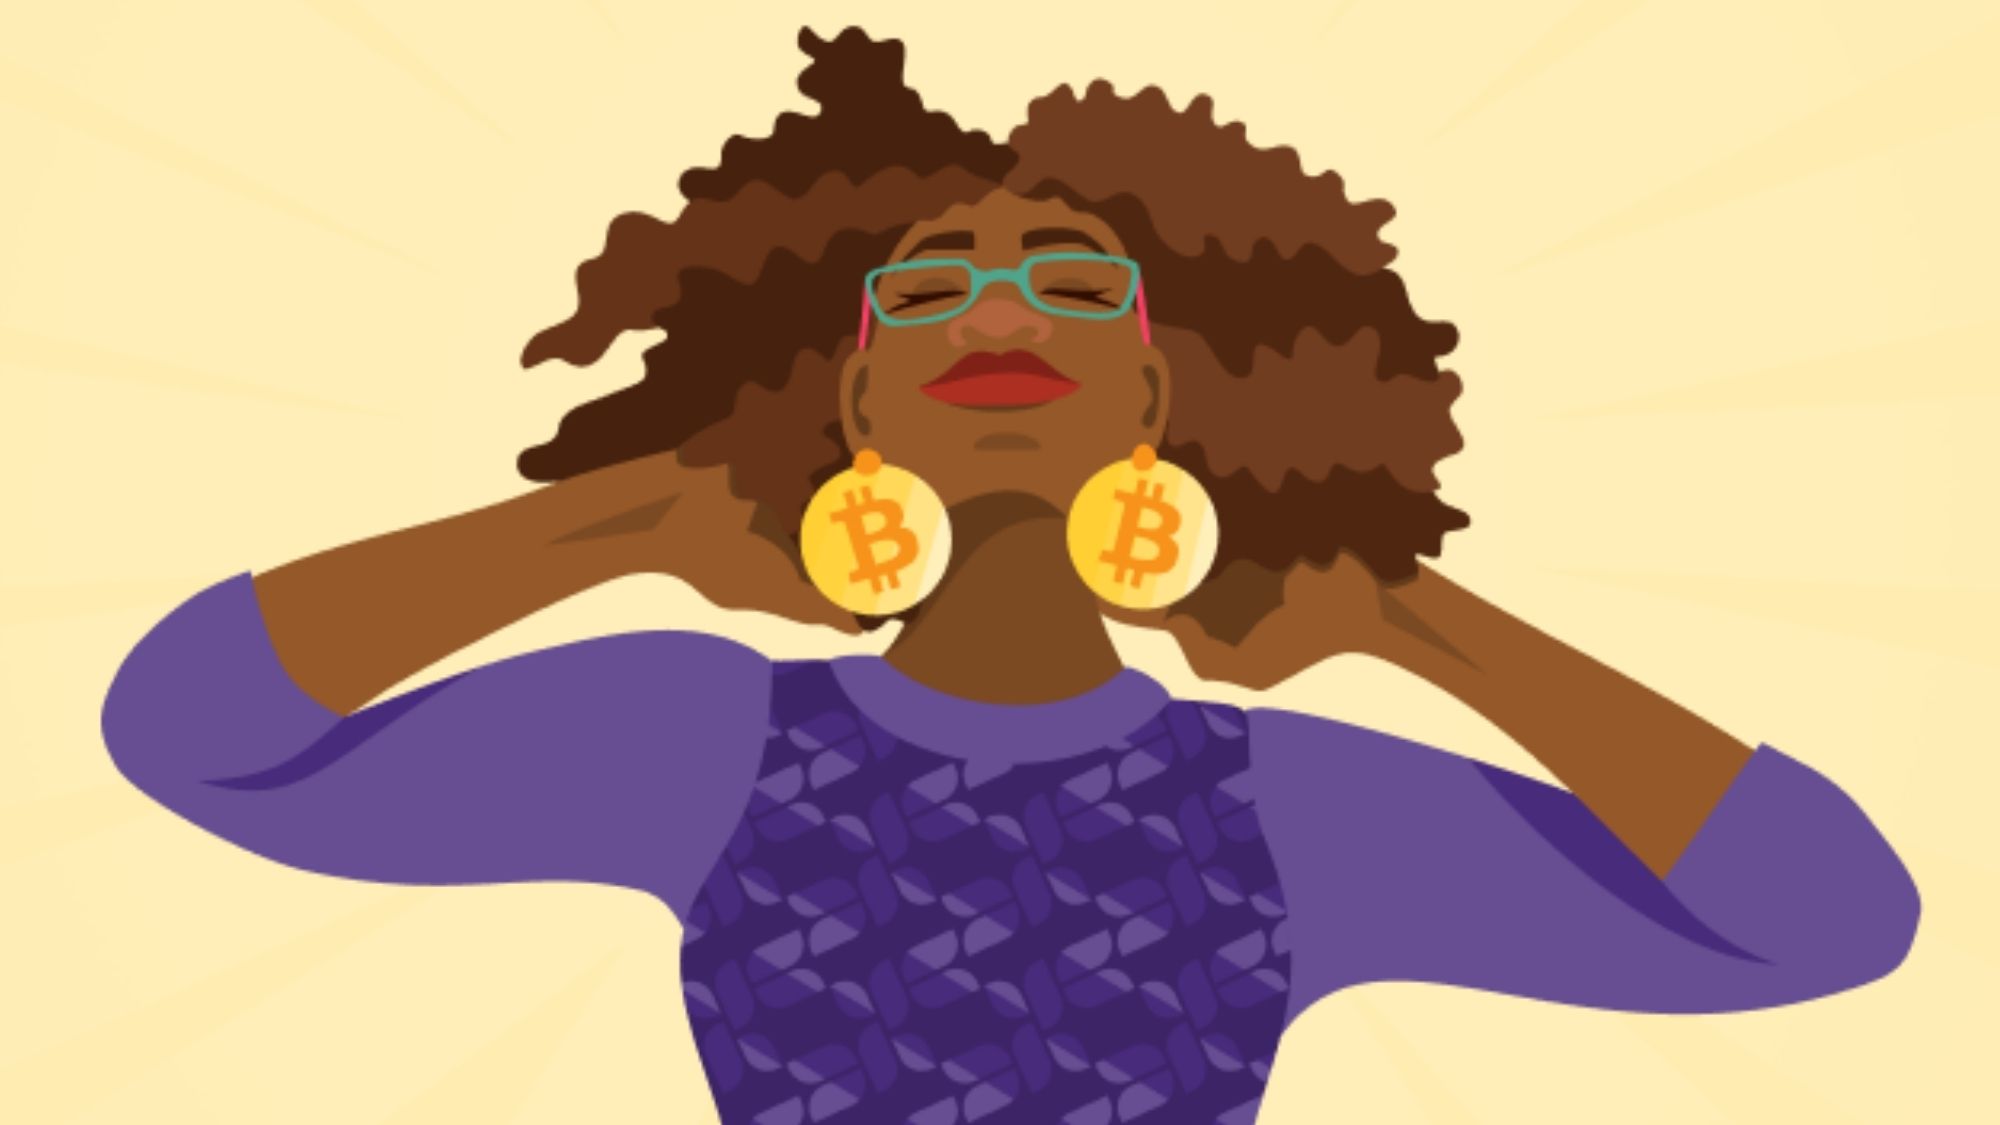 Paving the way for African women in crypto